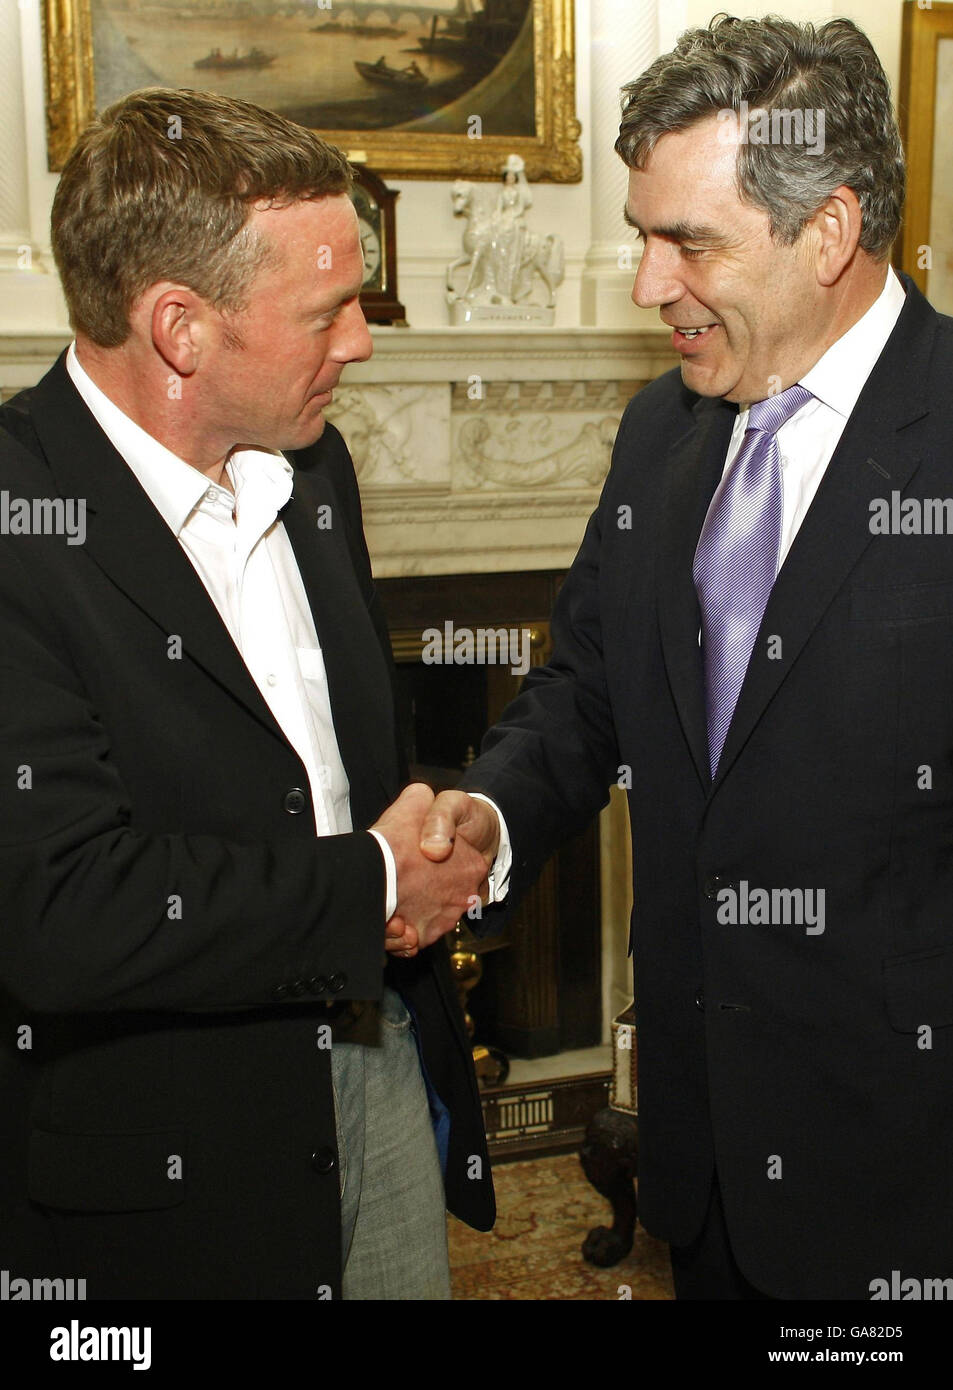 John Smeaton, the Glasgow baggage handler who tackled an alleged terrorist, meets British Prime Minister Gordon Brown at No.10 Downing Street. Stock Photo